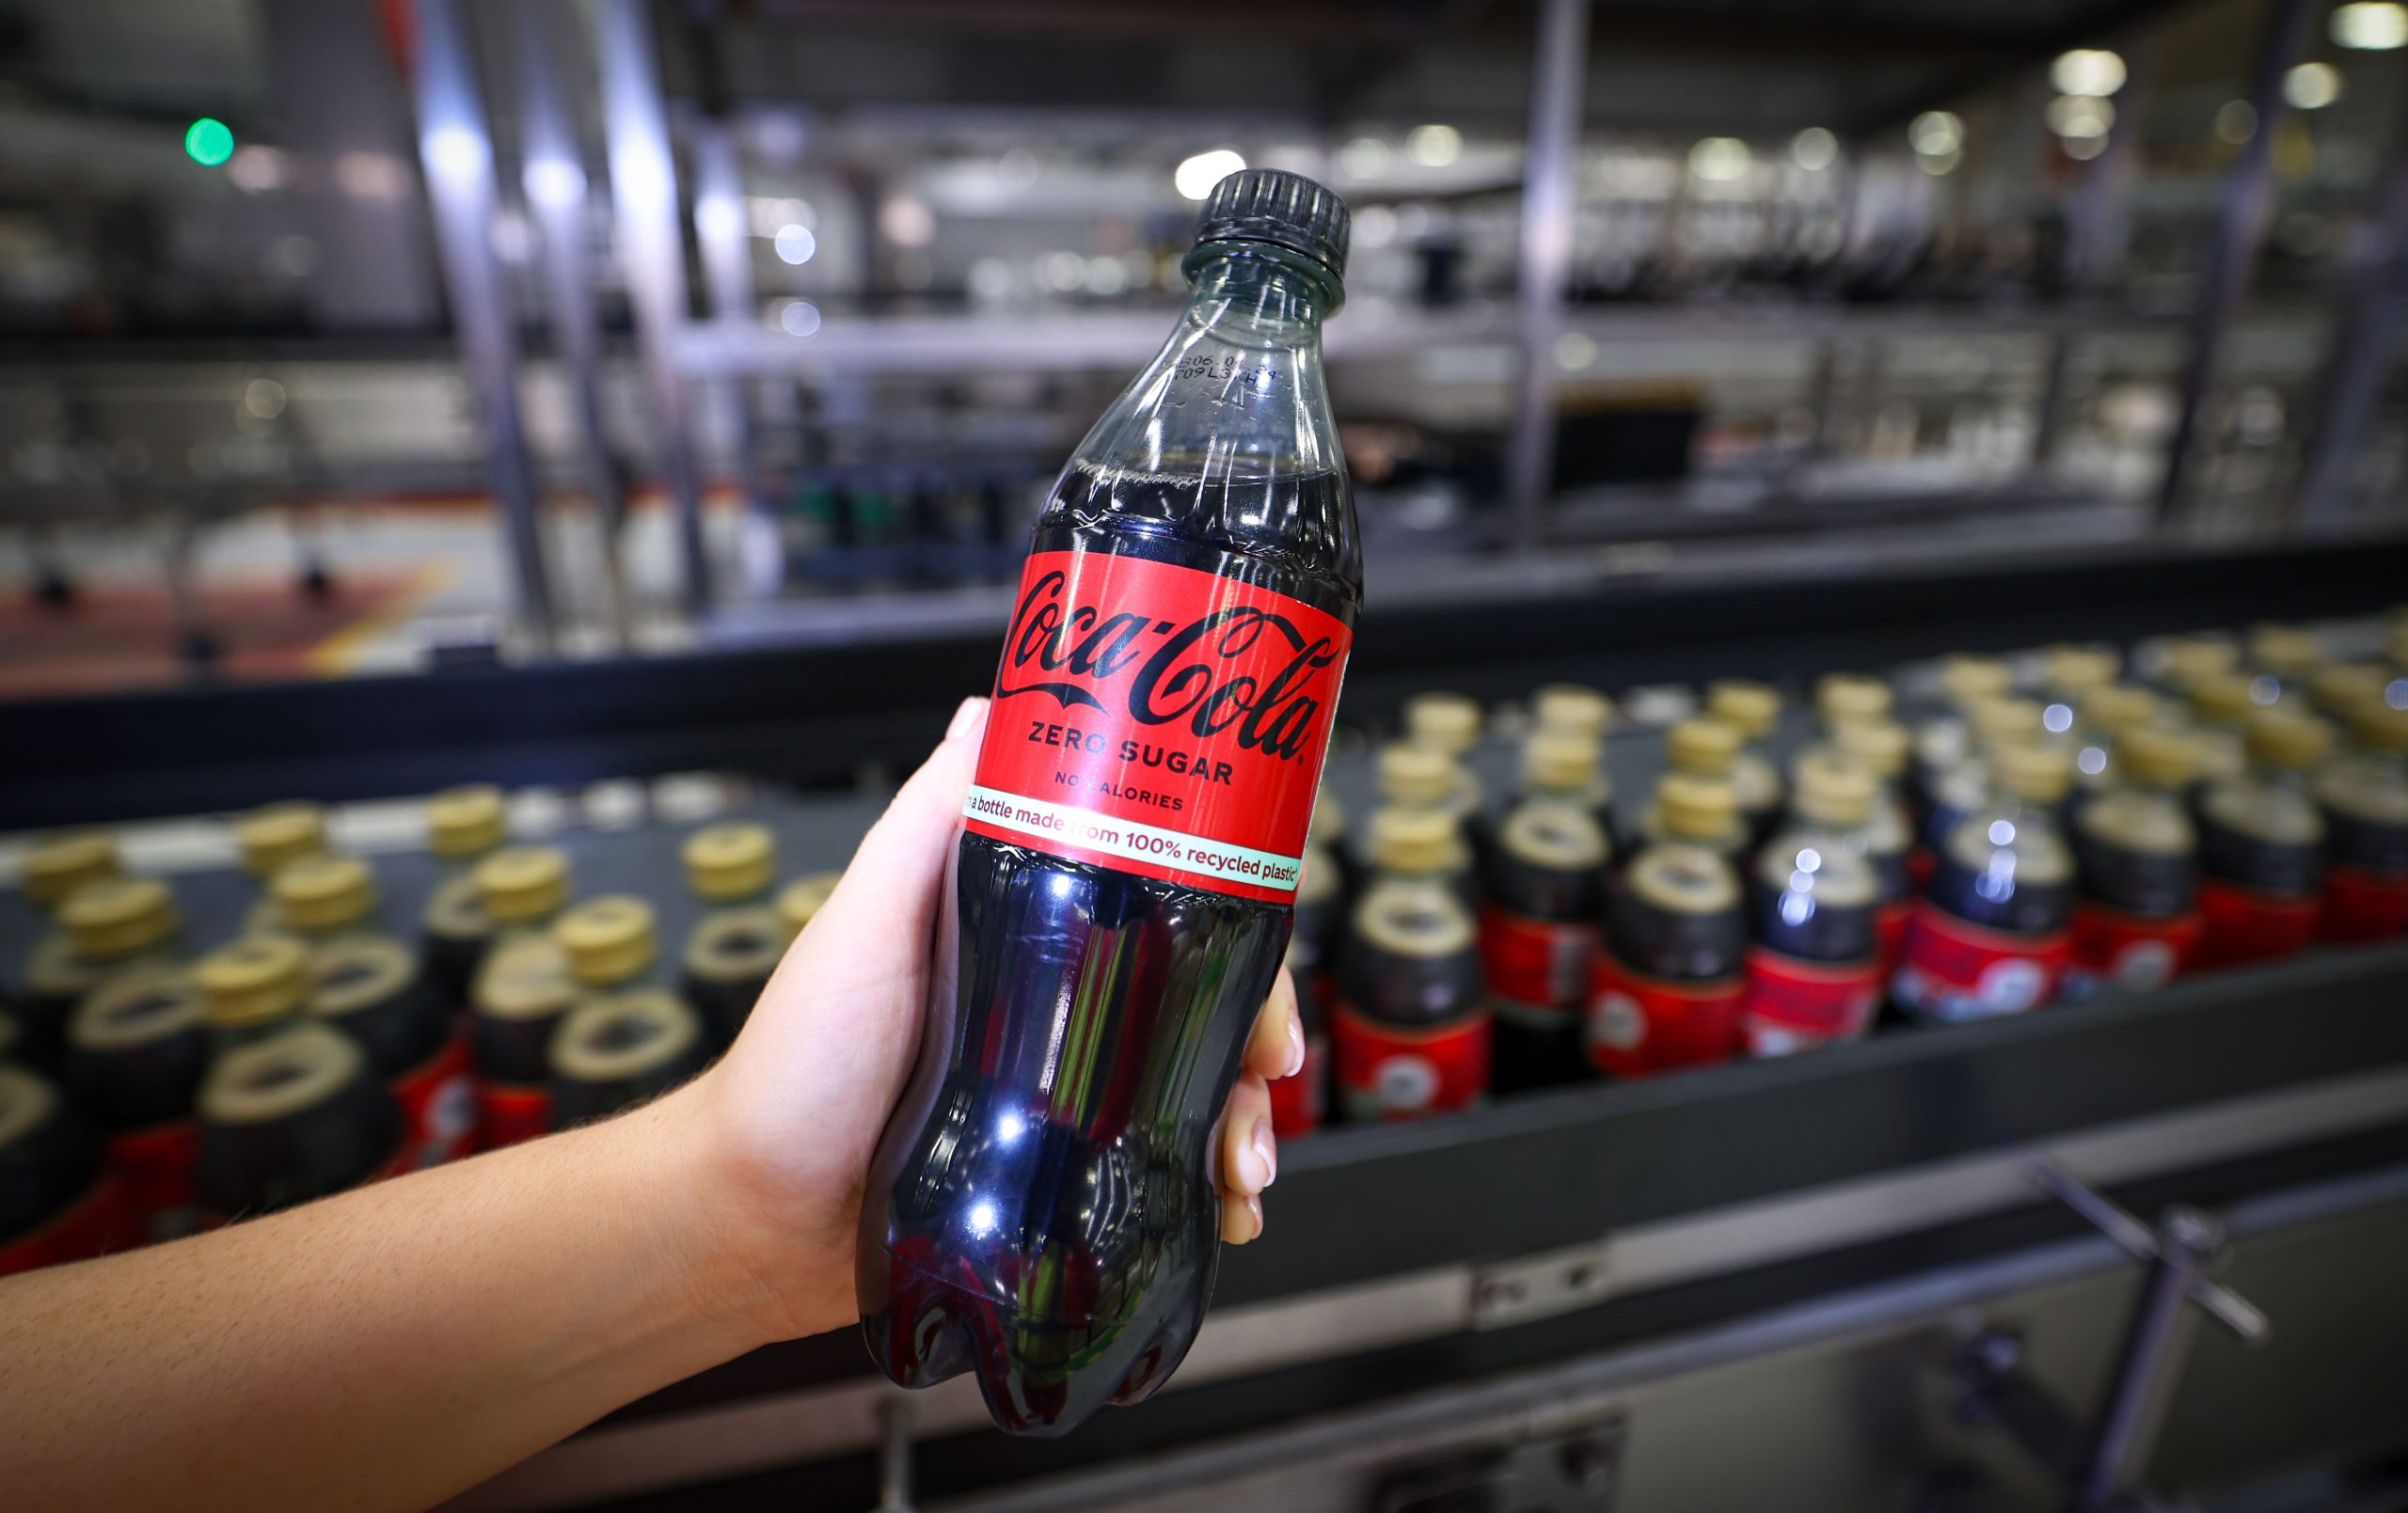 Coca-Cola reaches sustainability milestone with move to 100% recycled plastic